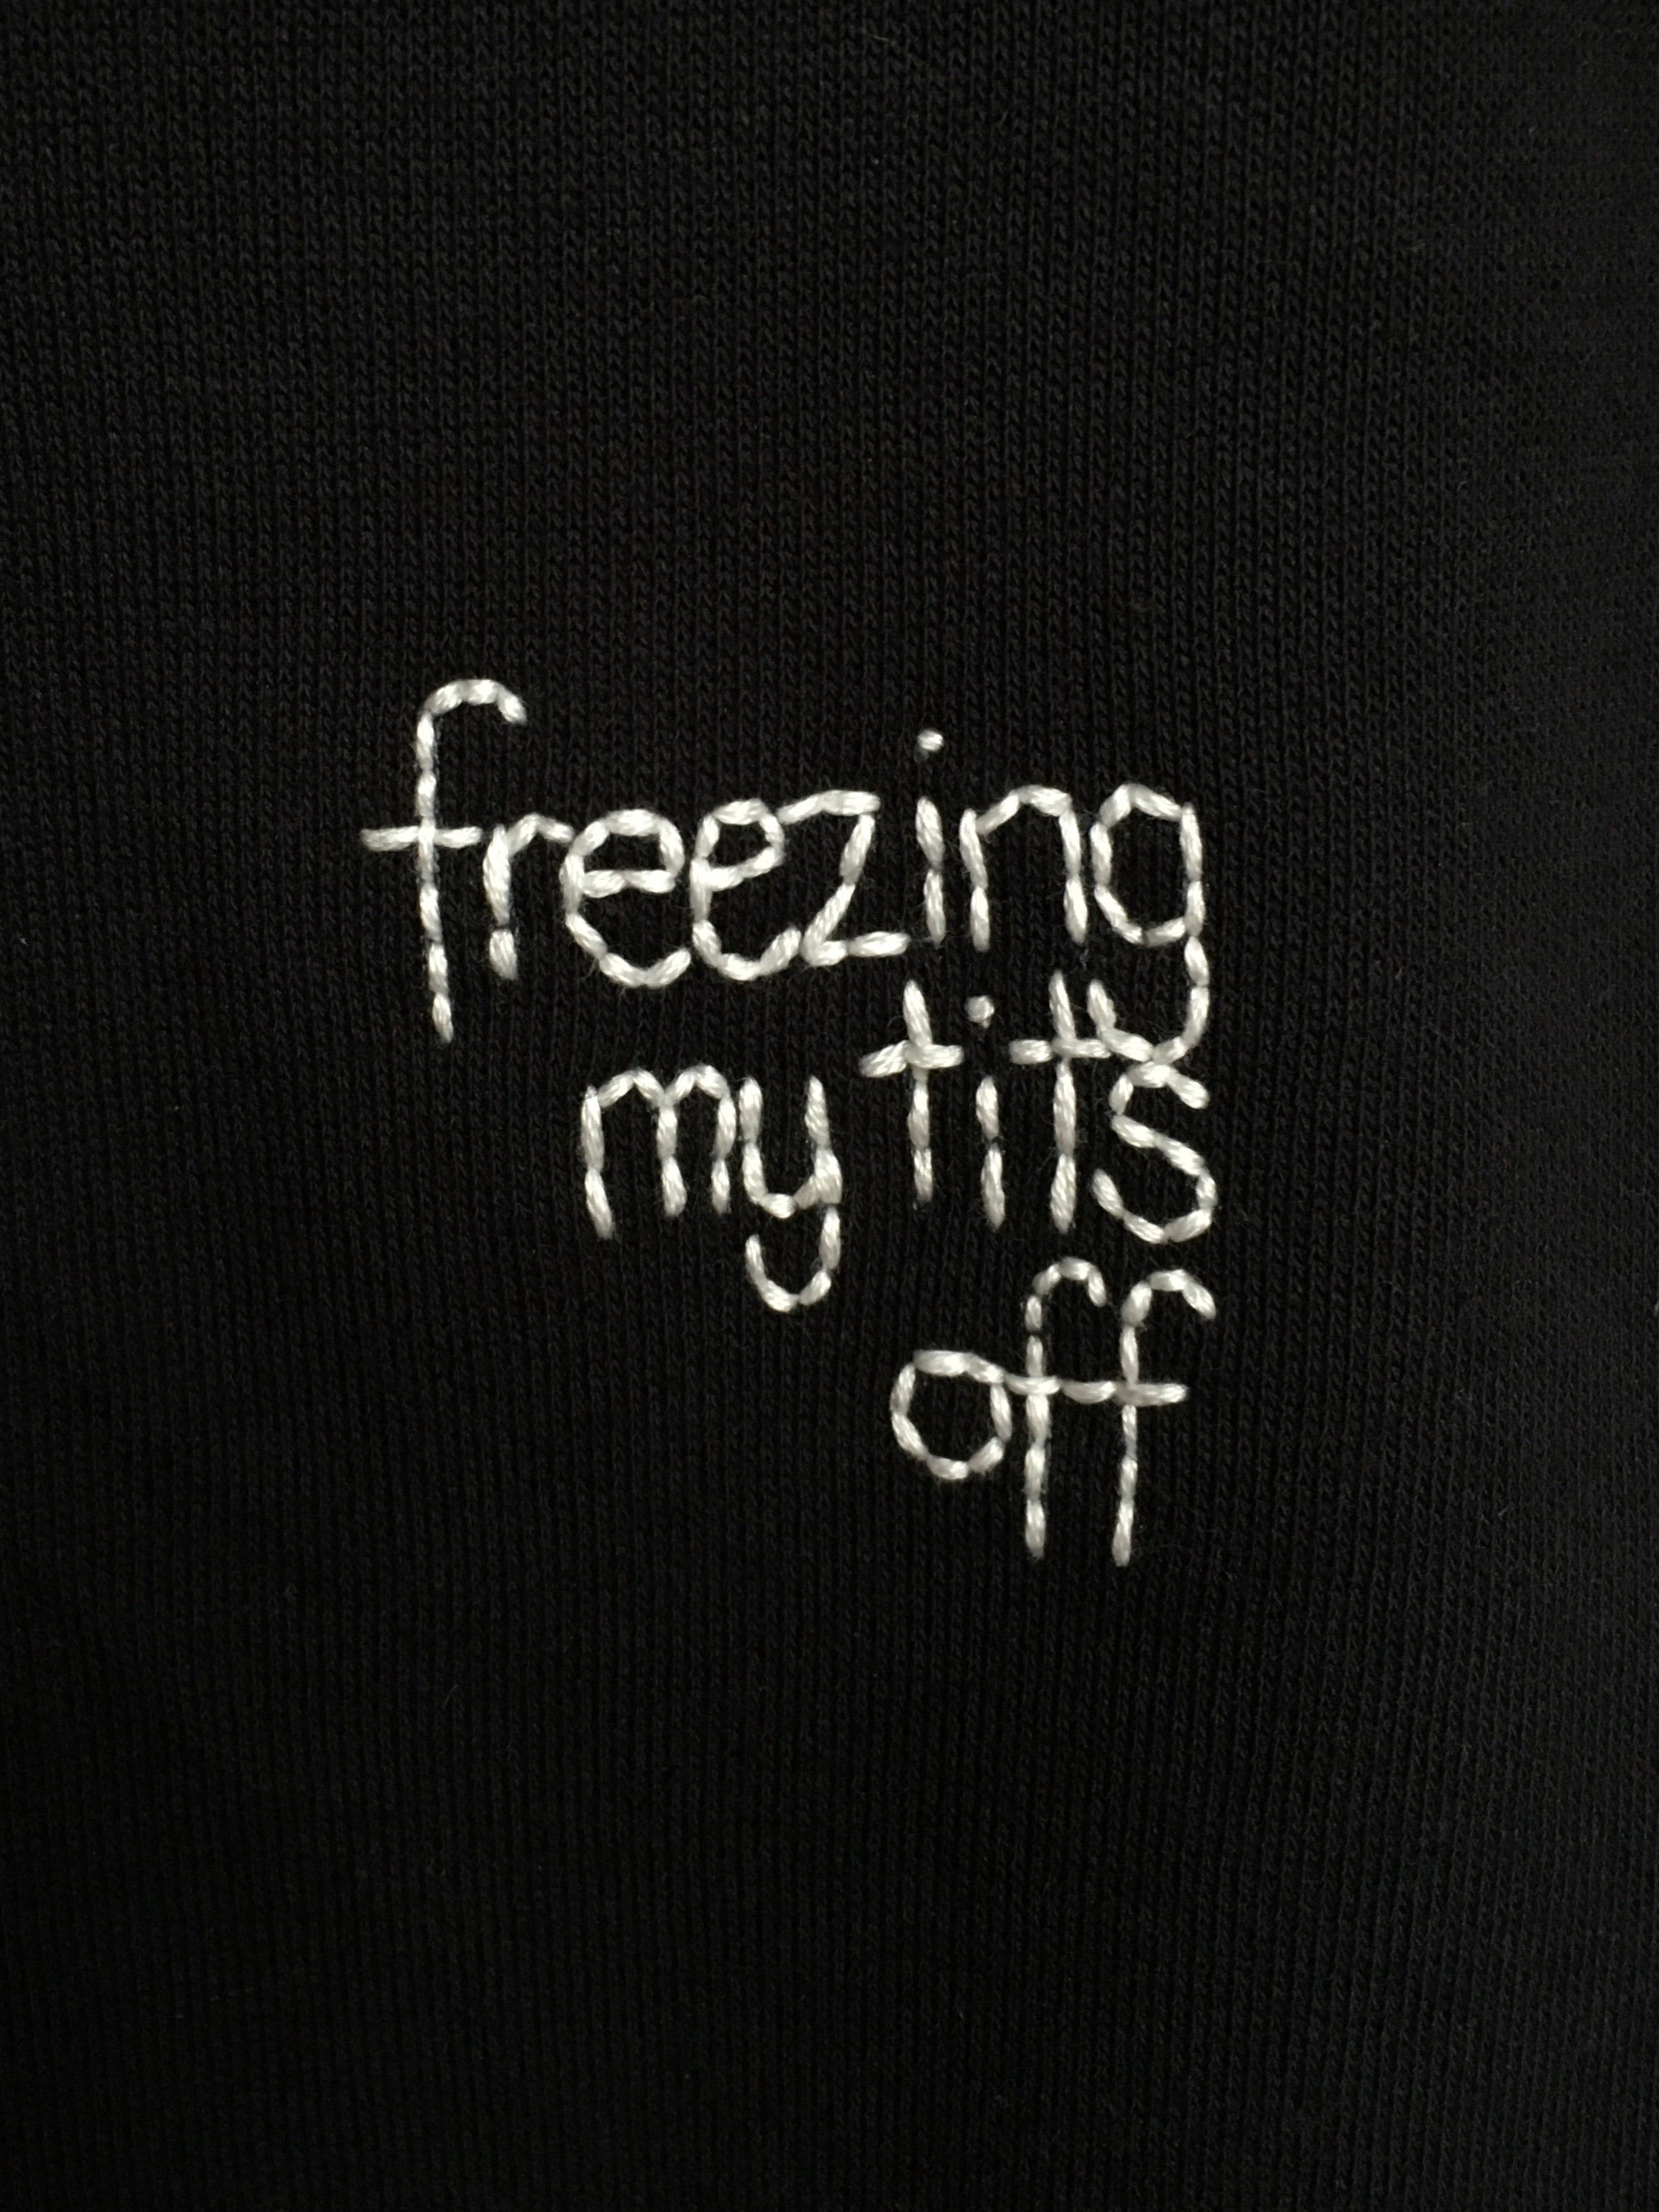 FREEZING MY TITS OFF - SWEATER